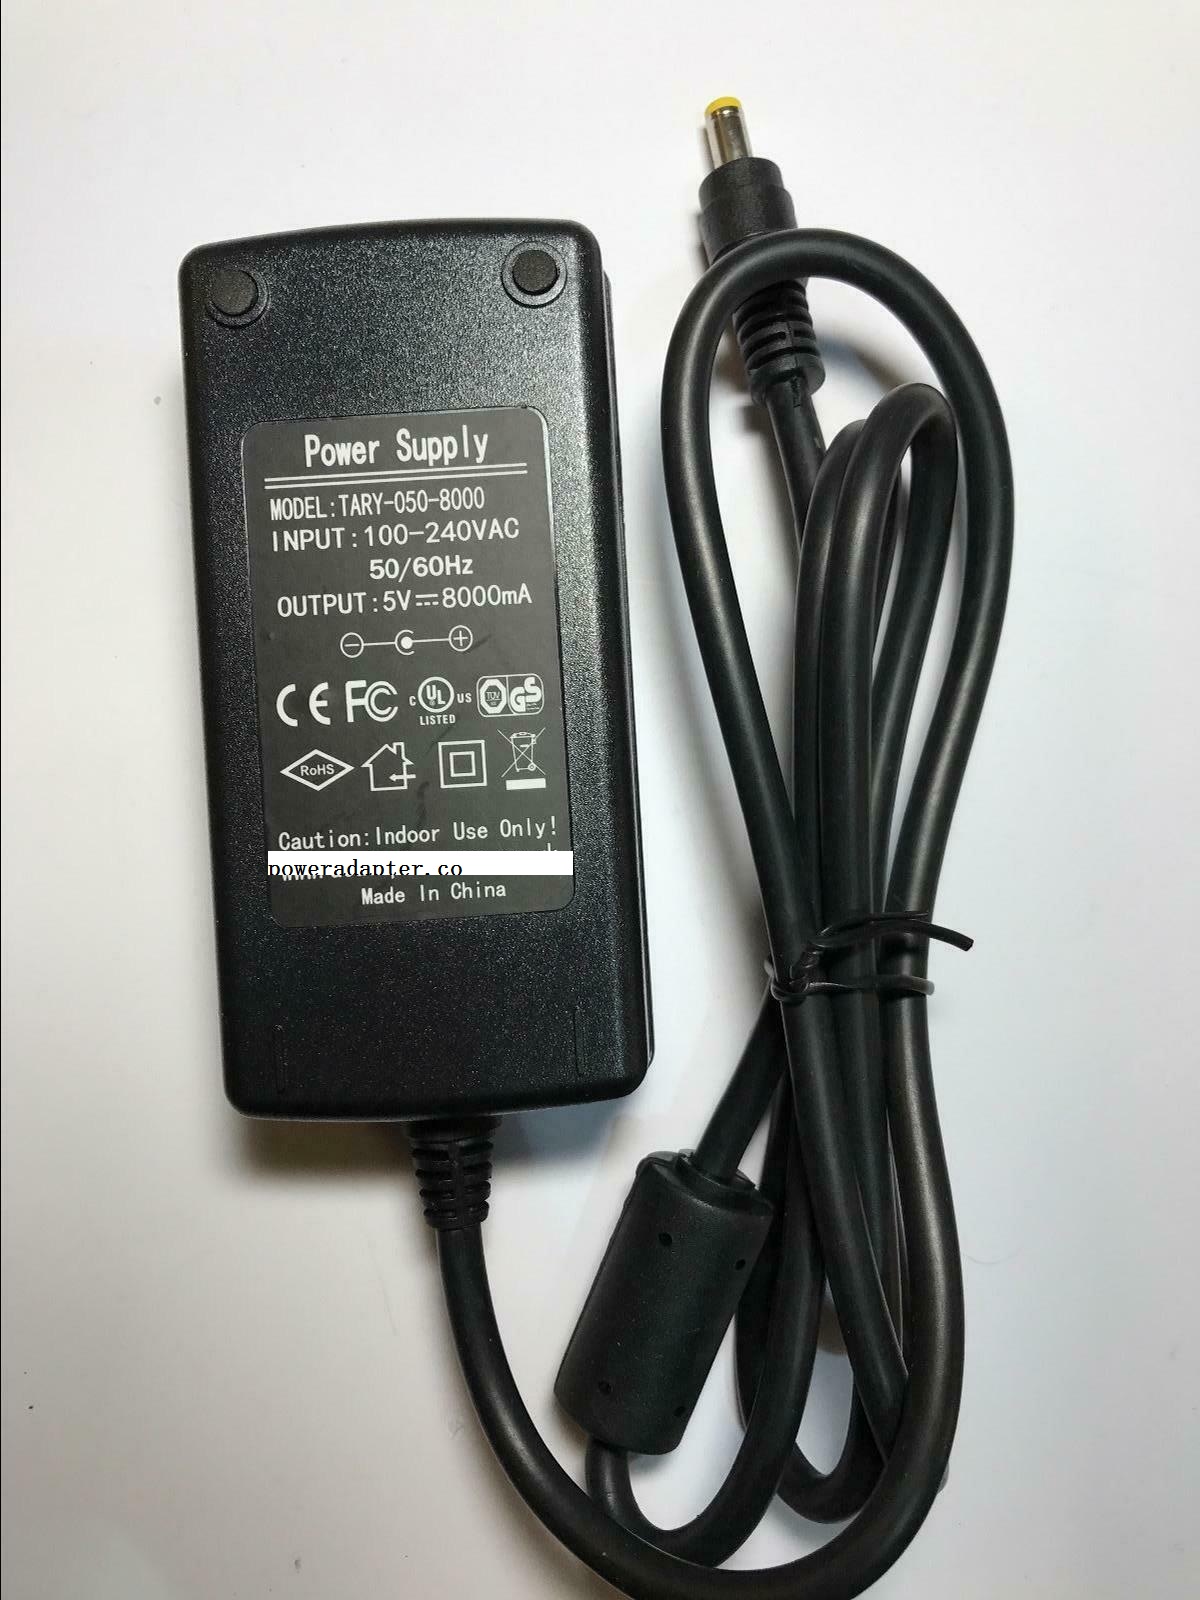 Replacement for 5V 8A AC/DC Adapter Power Supply model DYF-0508001A Desktop PSU Replacement for 5V 8A AC/DC Adapter Po